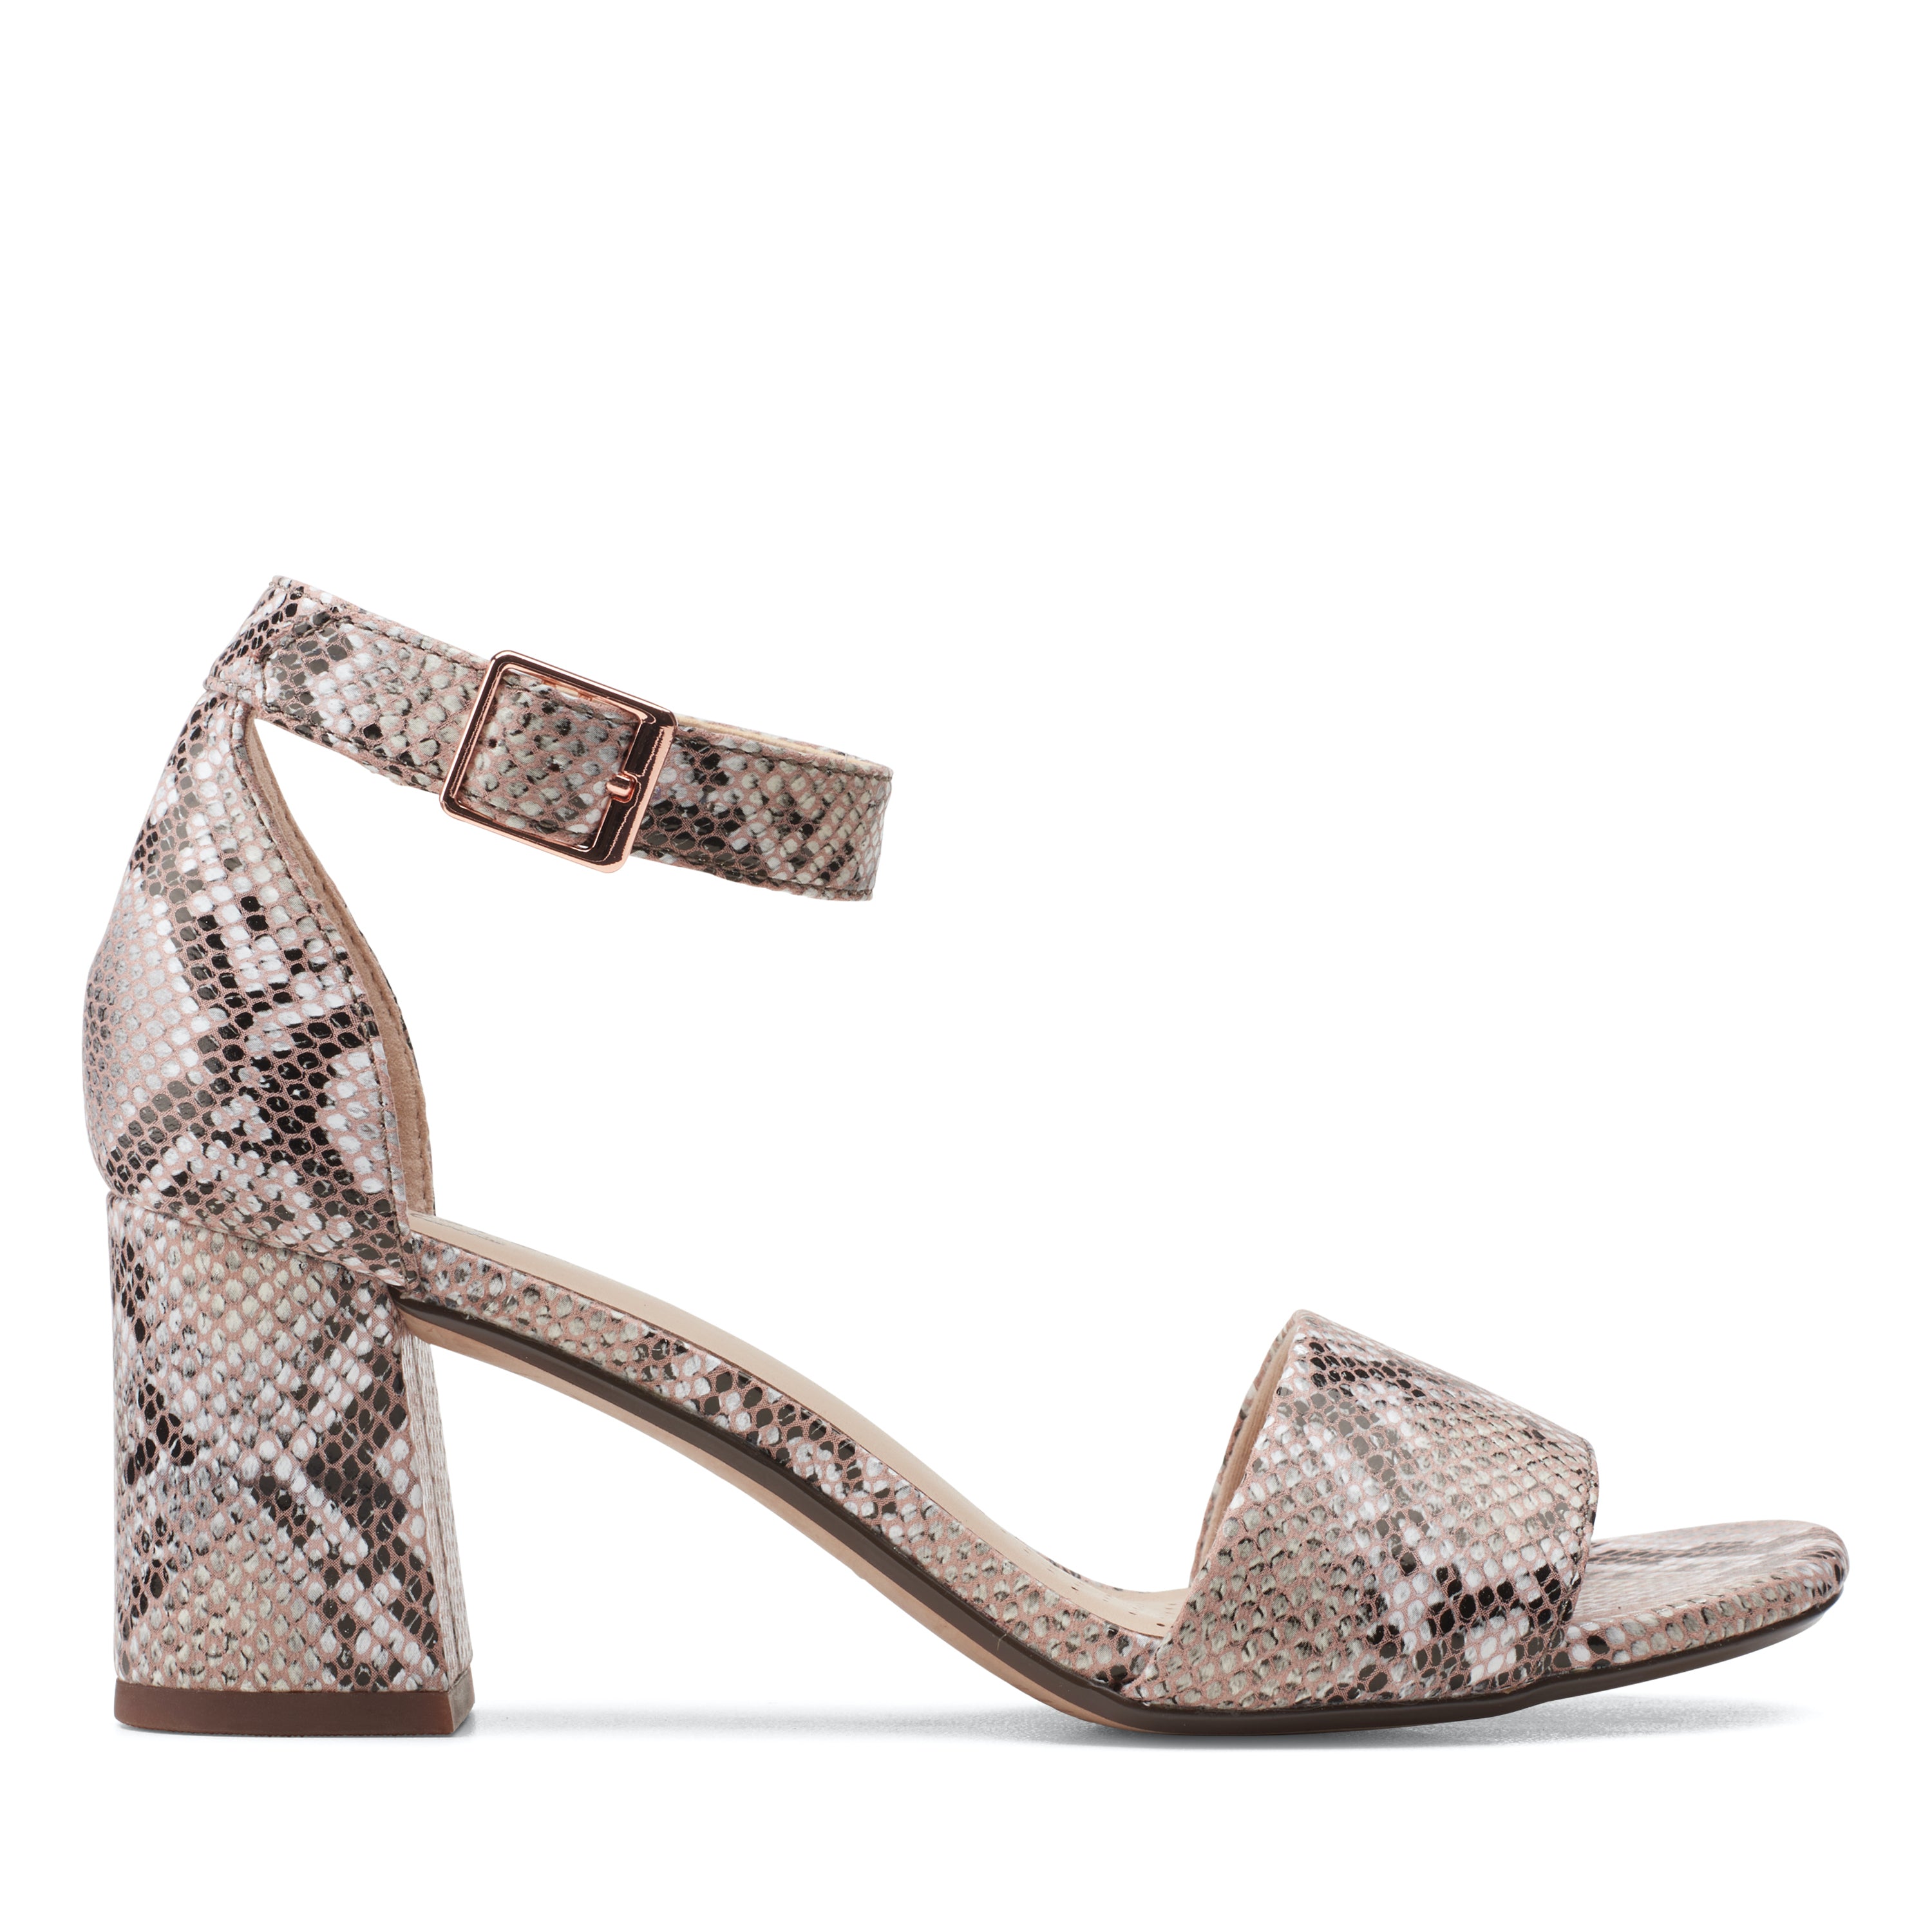 Buy Tan Brown Heeled Sandals for Women by Acai Online | Ajio.com